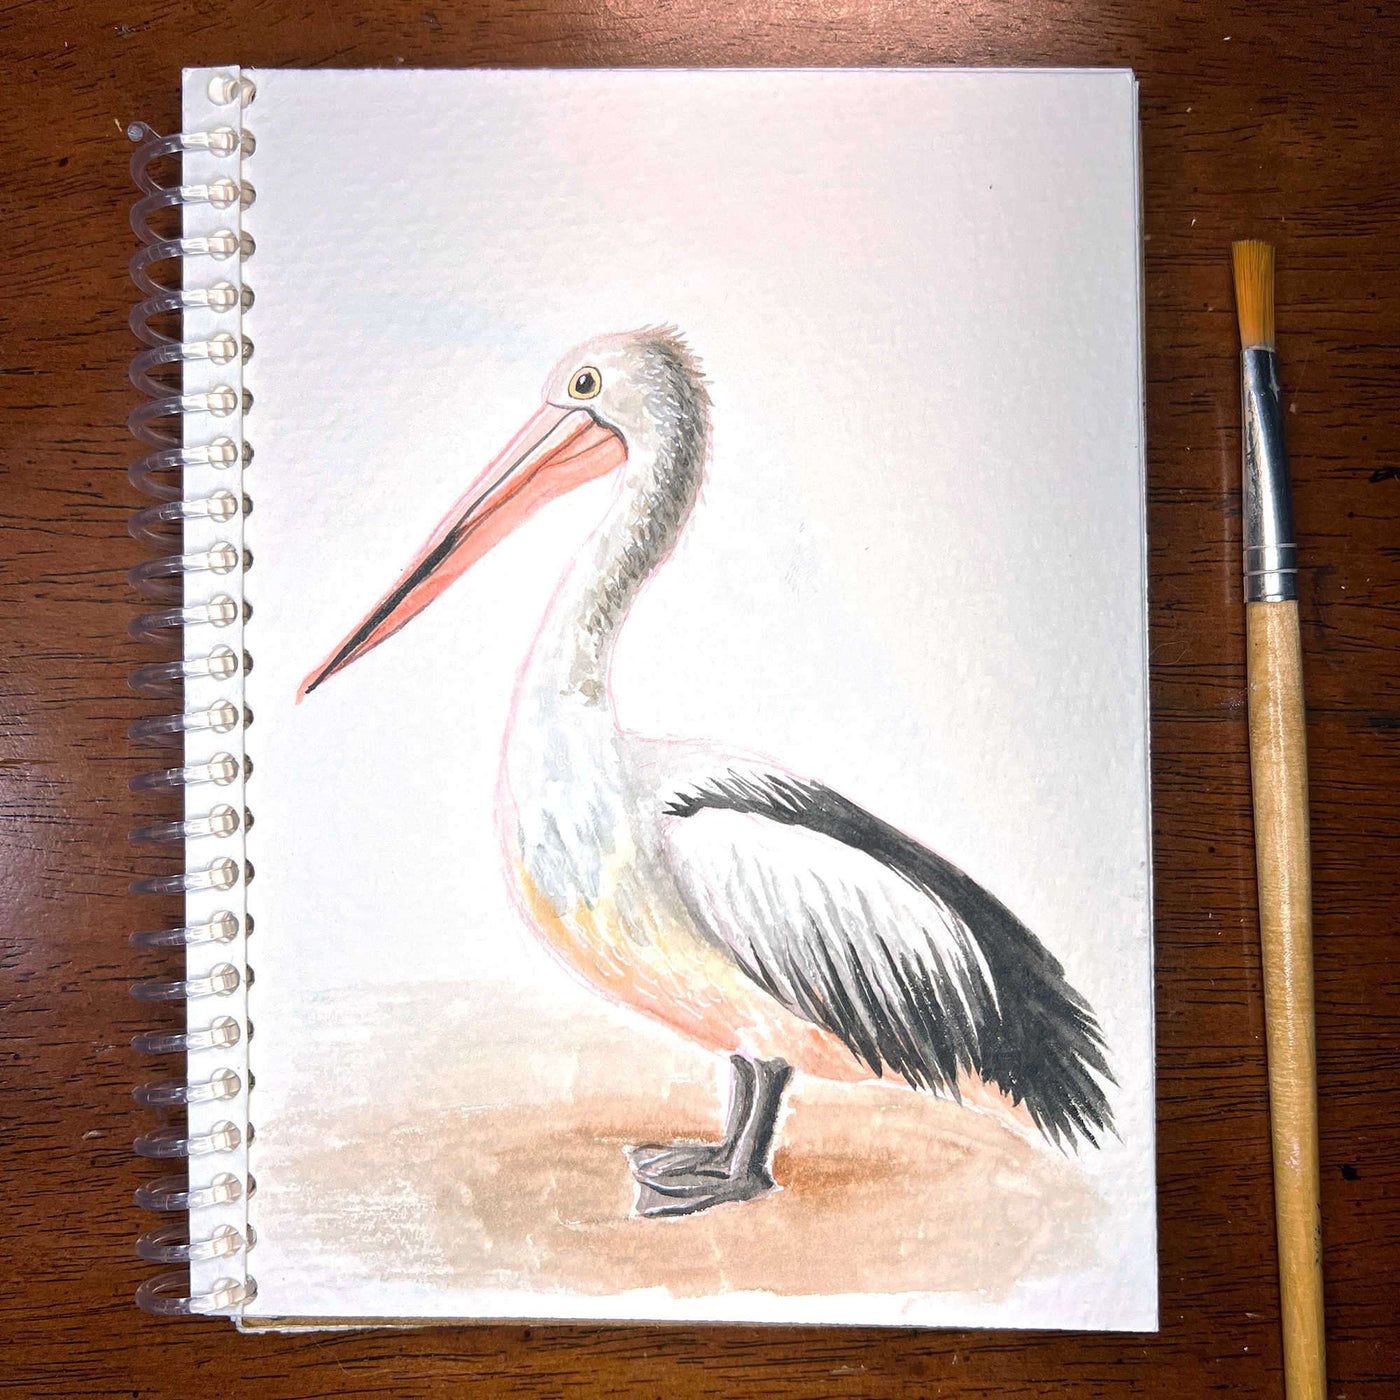 Pelican - Original Watercolor Painting of a pelican on a sketchbook, lying next to a paintbrush on a wooden surface.